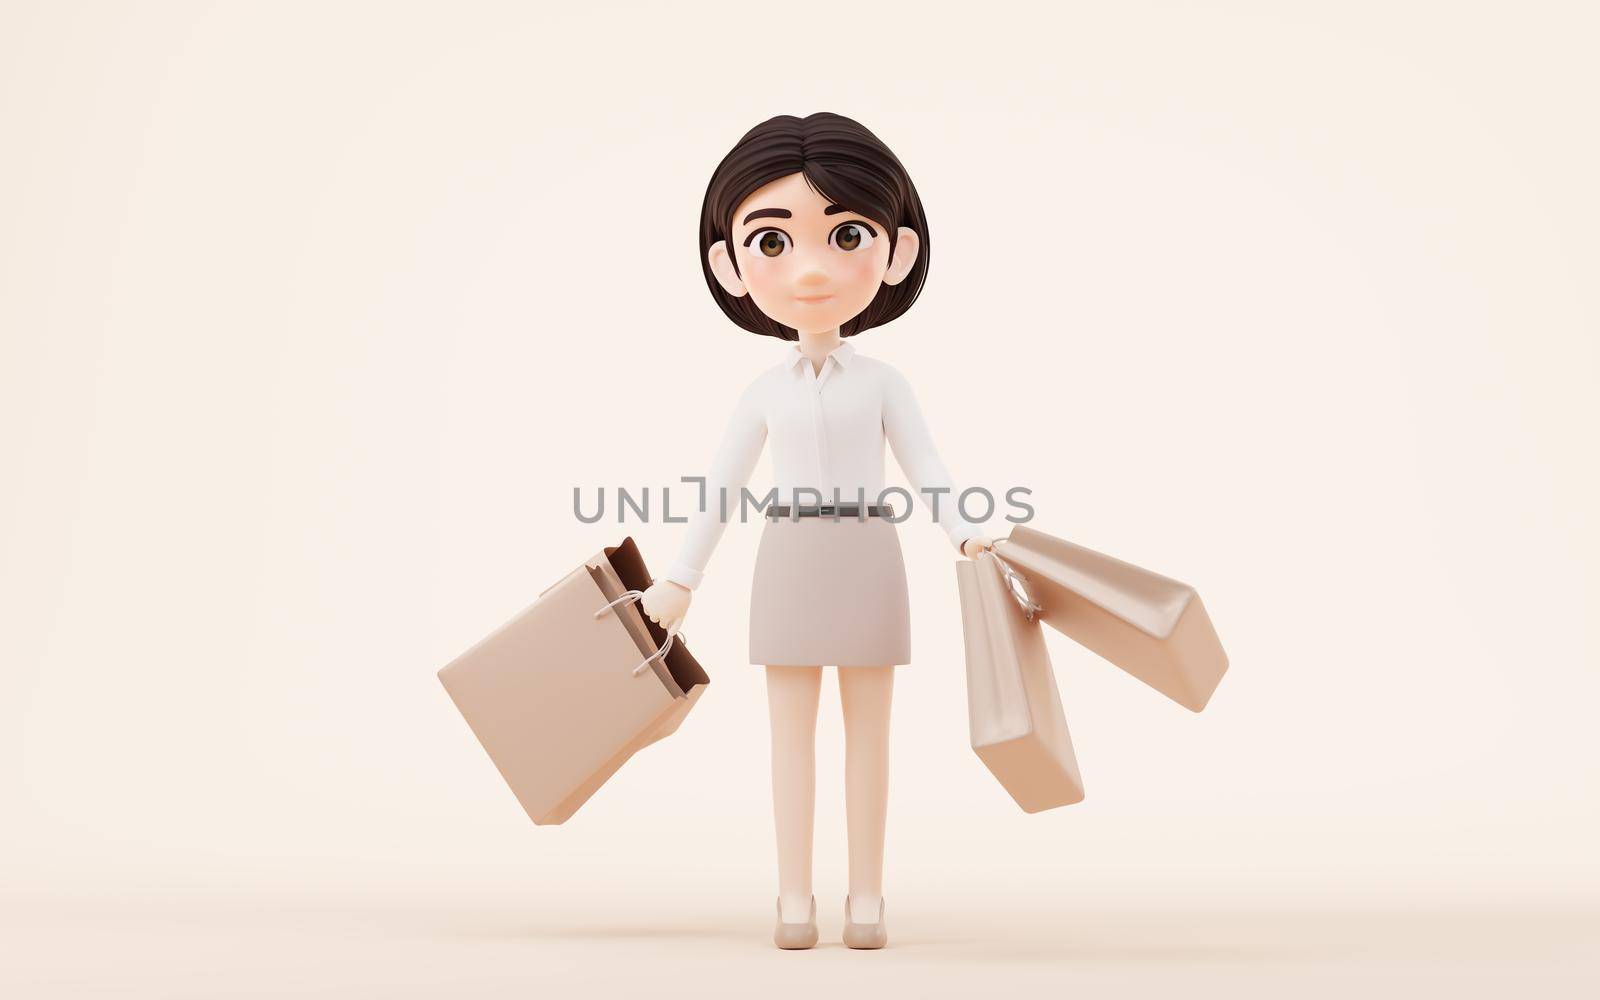 Cartoon girl with shopping bags in hand, 3d rendering. Computer digital drawing.